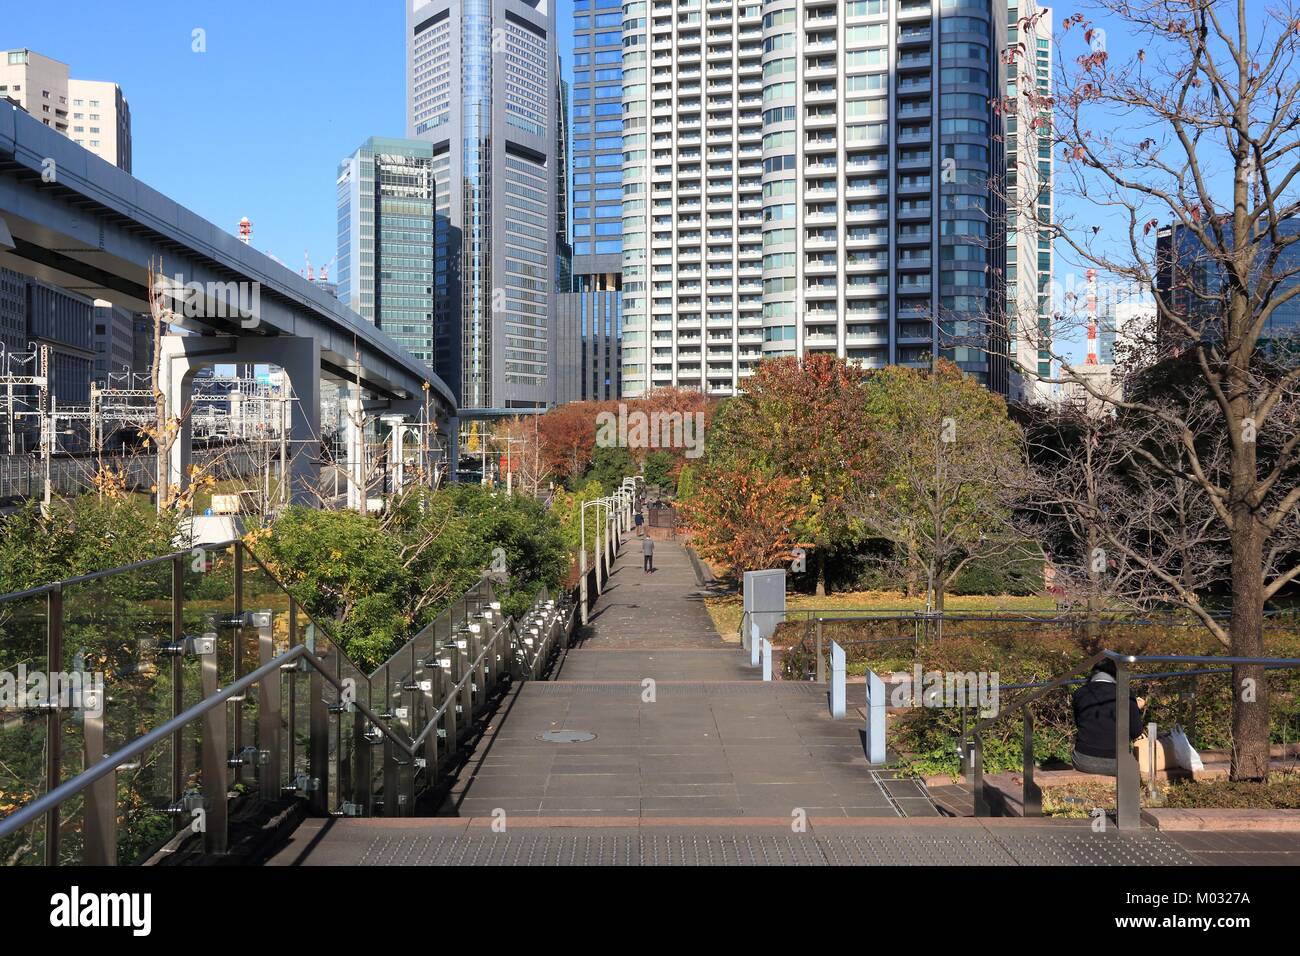 Shiodome, Tokyo - modern city architecture with elevated expressways. Autumn park. Stock Photo